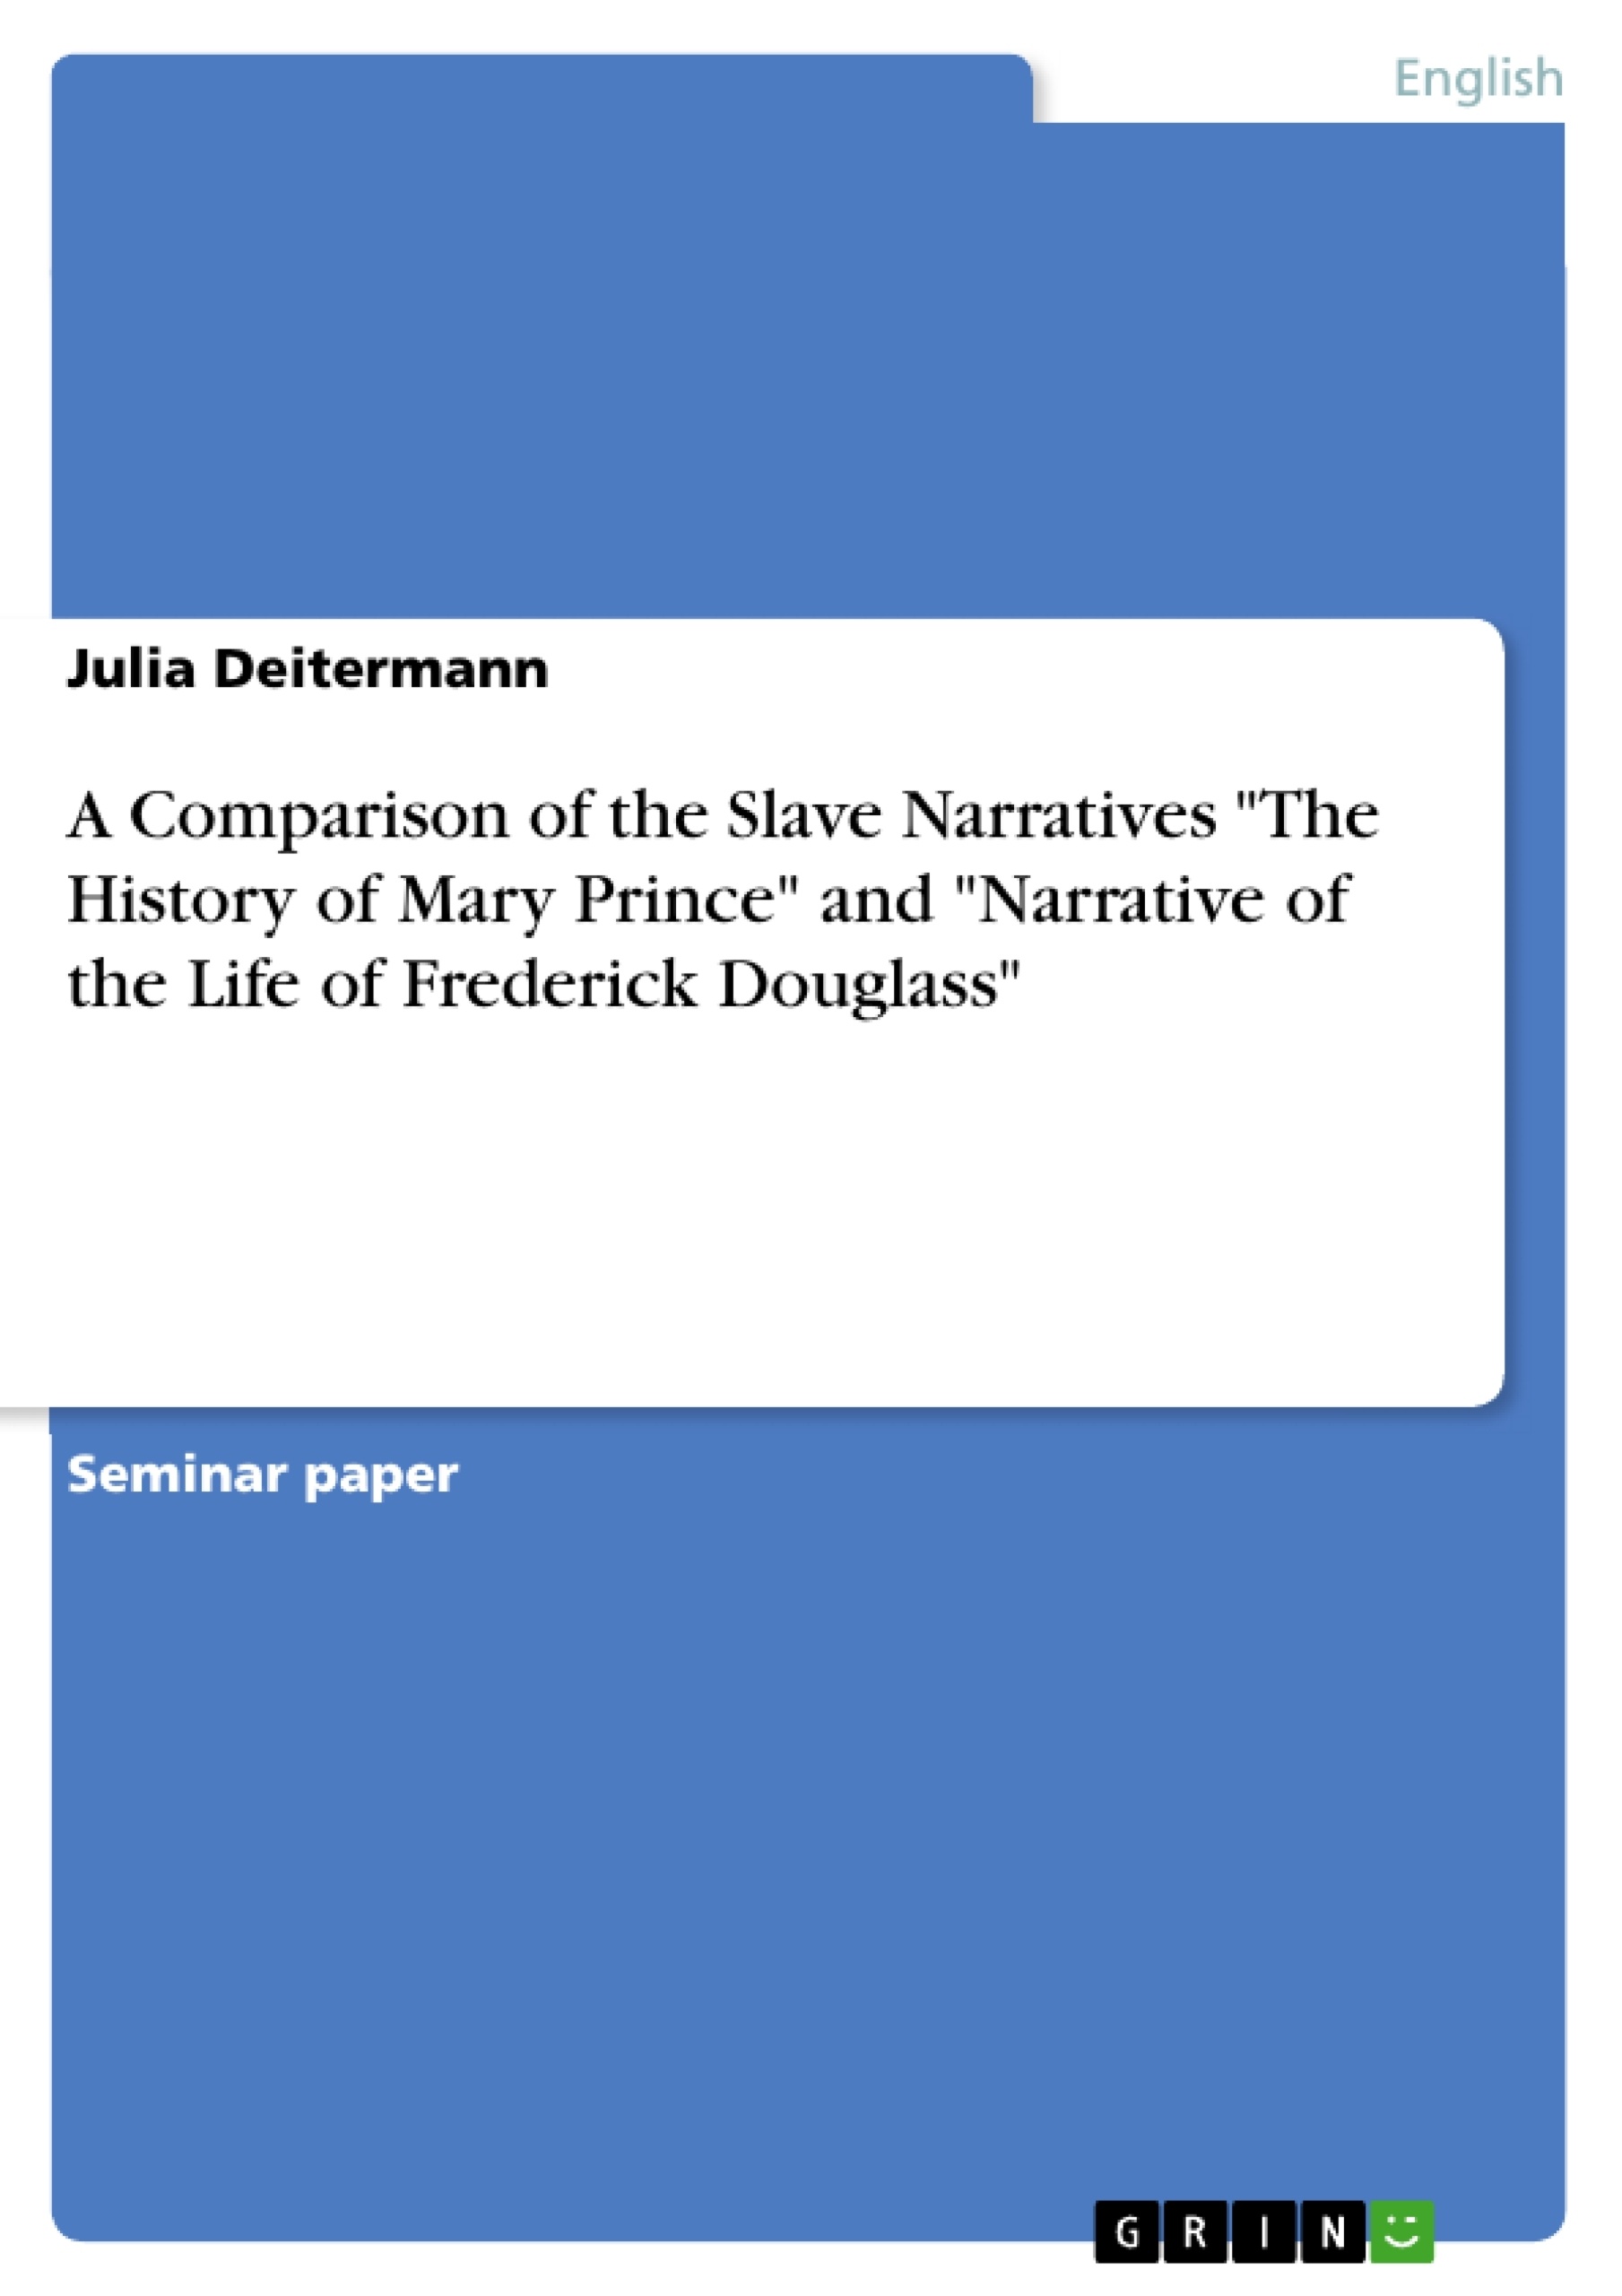 Title: A Comparison of the Slave Narratives "The History of Mary Prince" and "Narrative of the Life of Frederick Douglass"